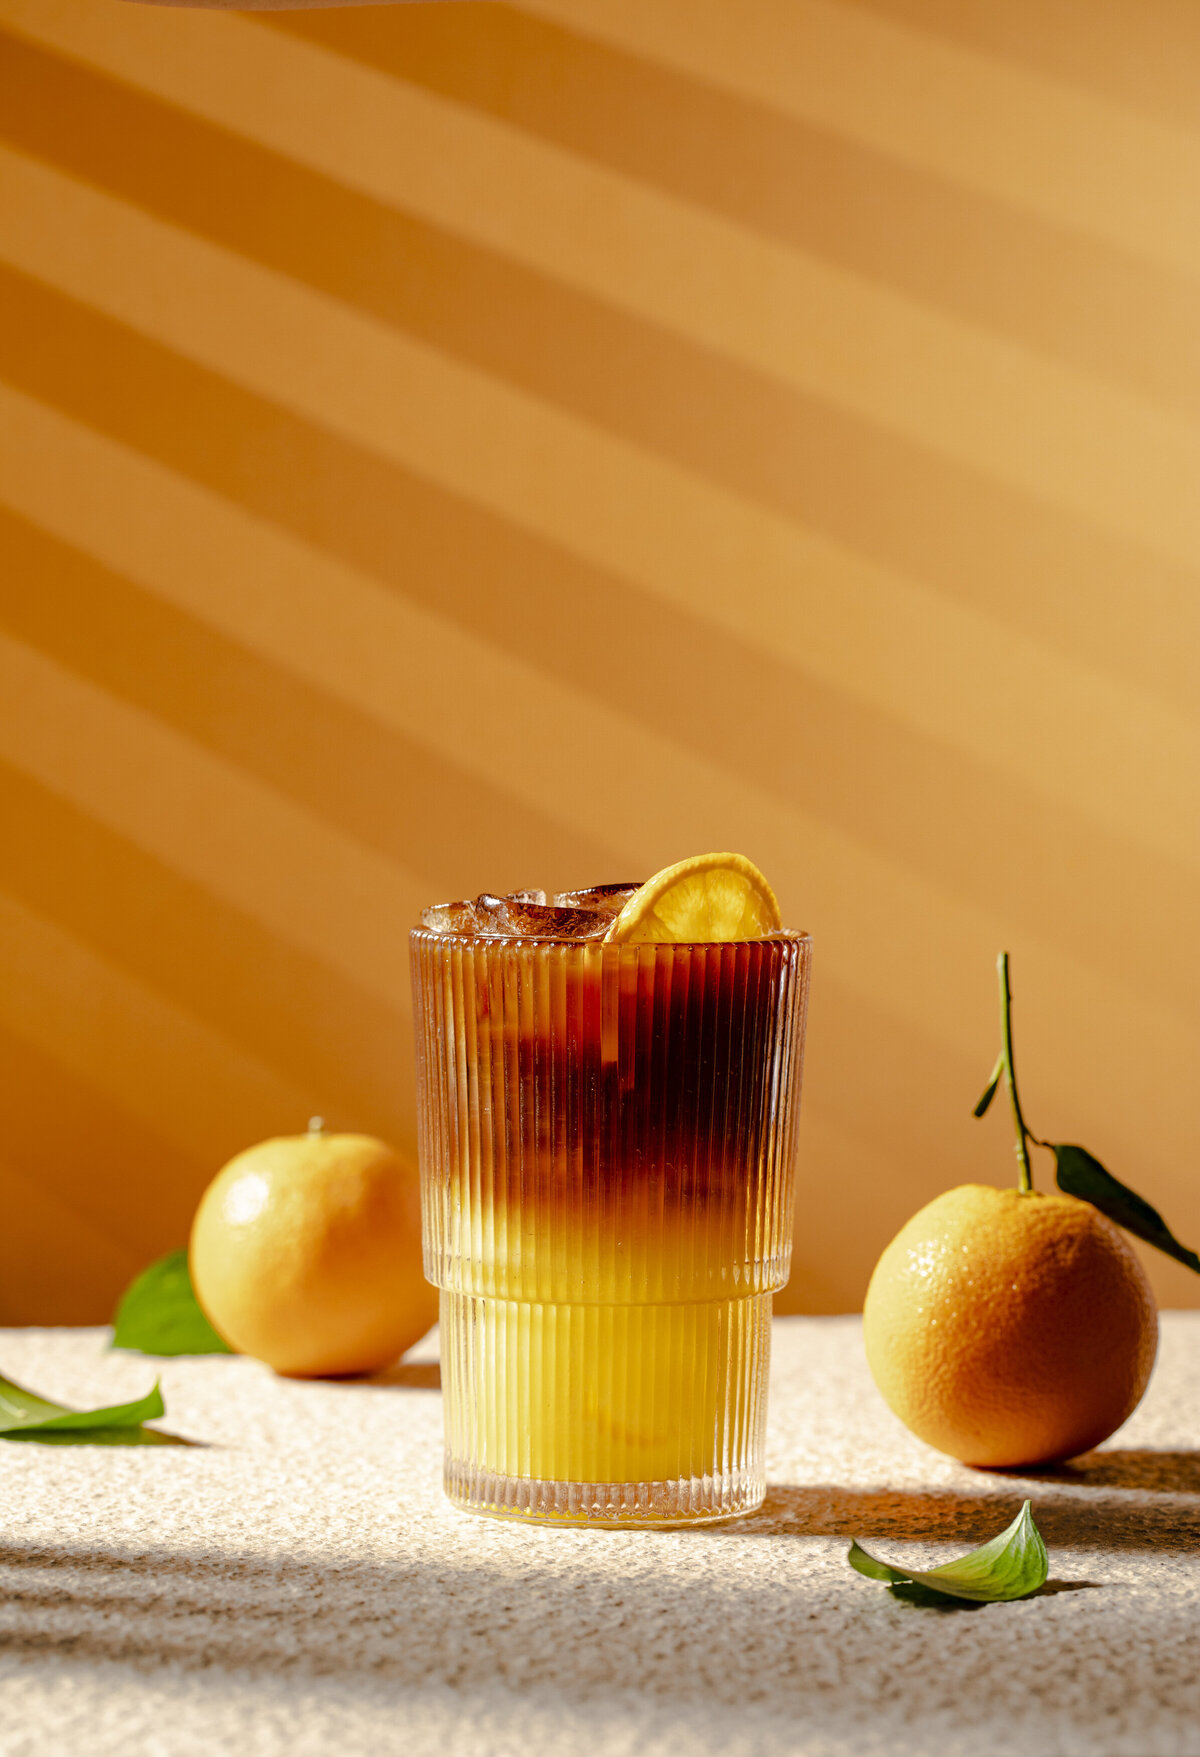 A layered orange drink in a short glass.